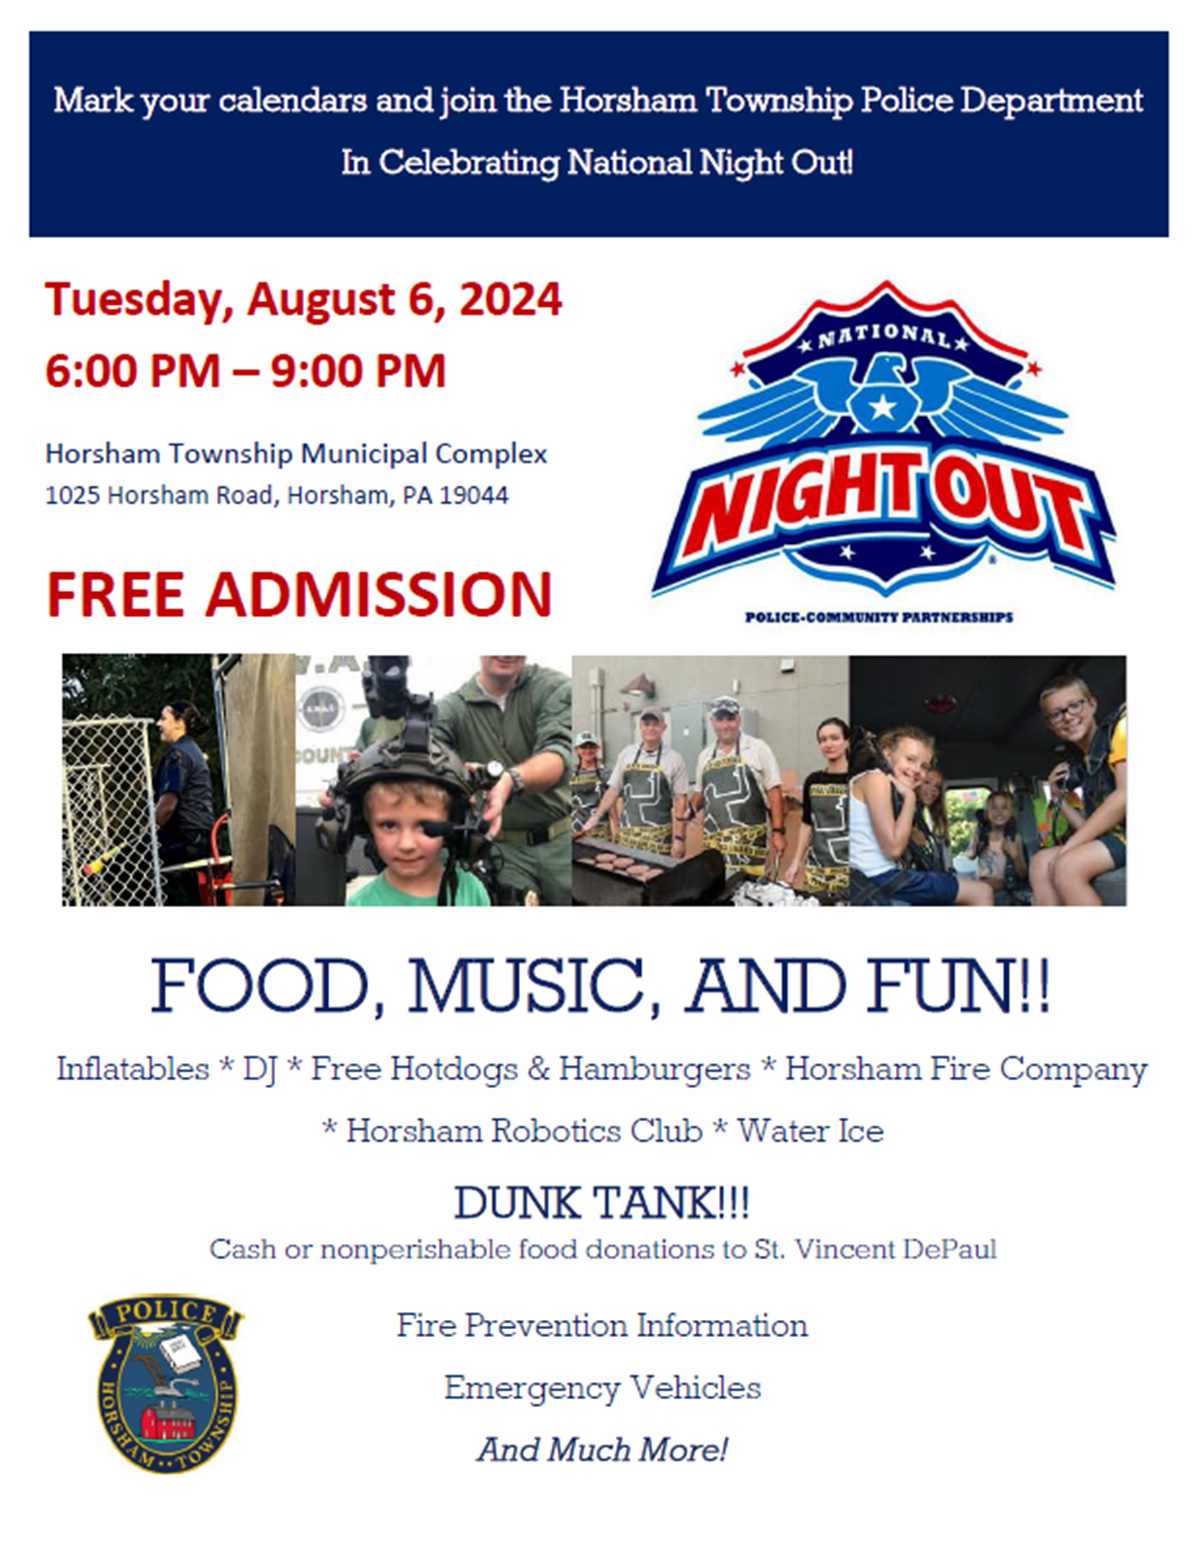 Horsham Township National Night Out, Tuesday, August 6 from 6PM-9PM